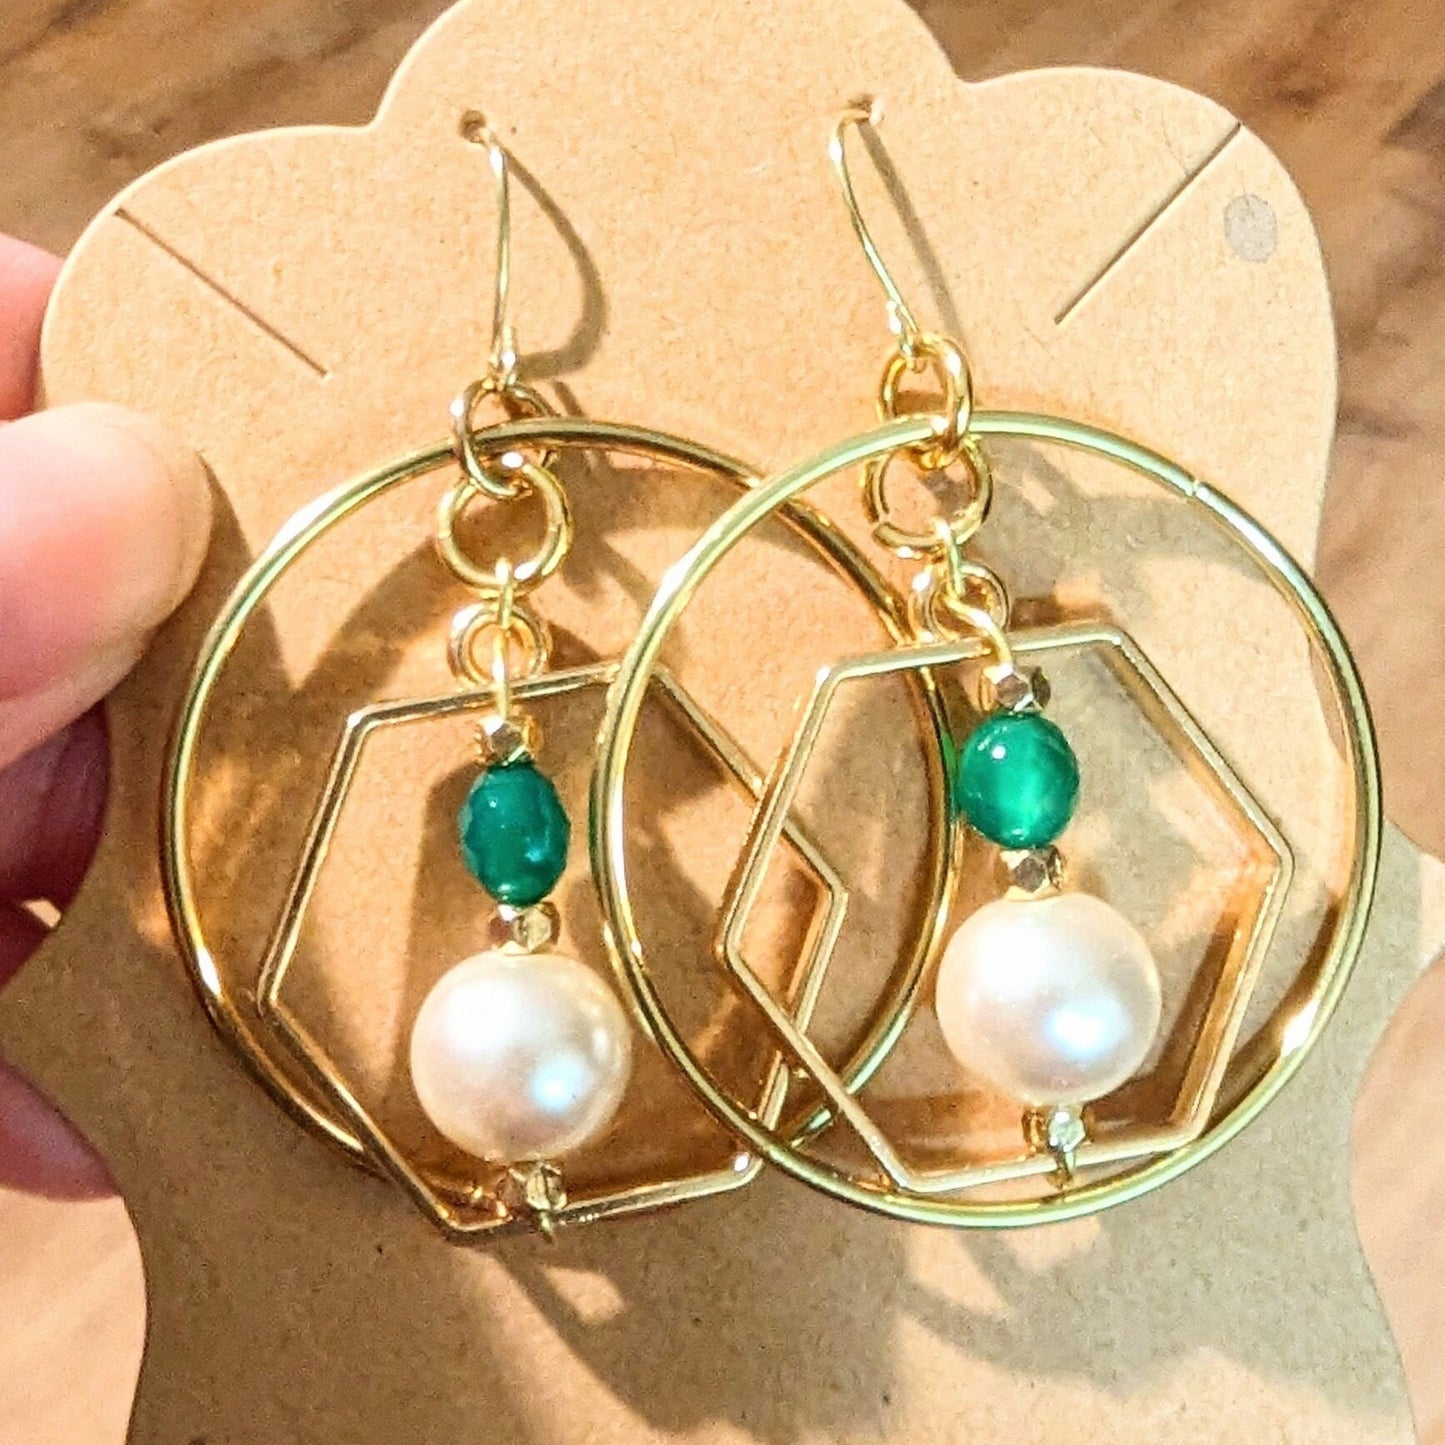 Jade Bead and Geometric Hoop Statement Earrings Asian Palace Inspired Earrings Collection